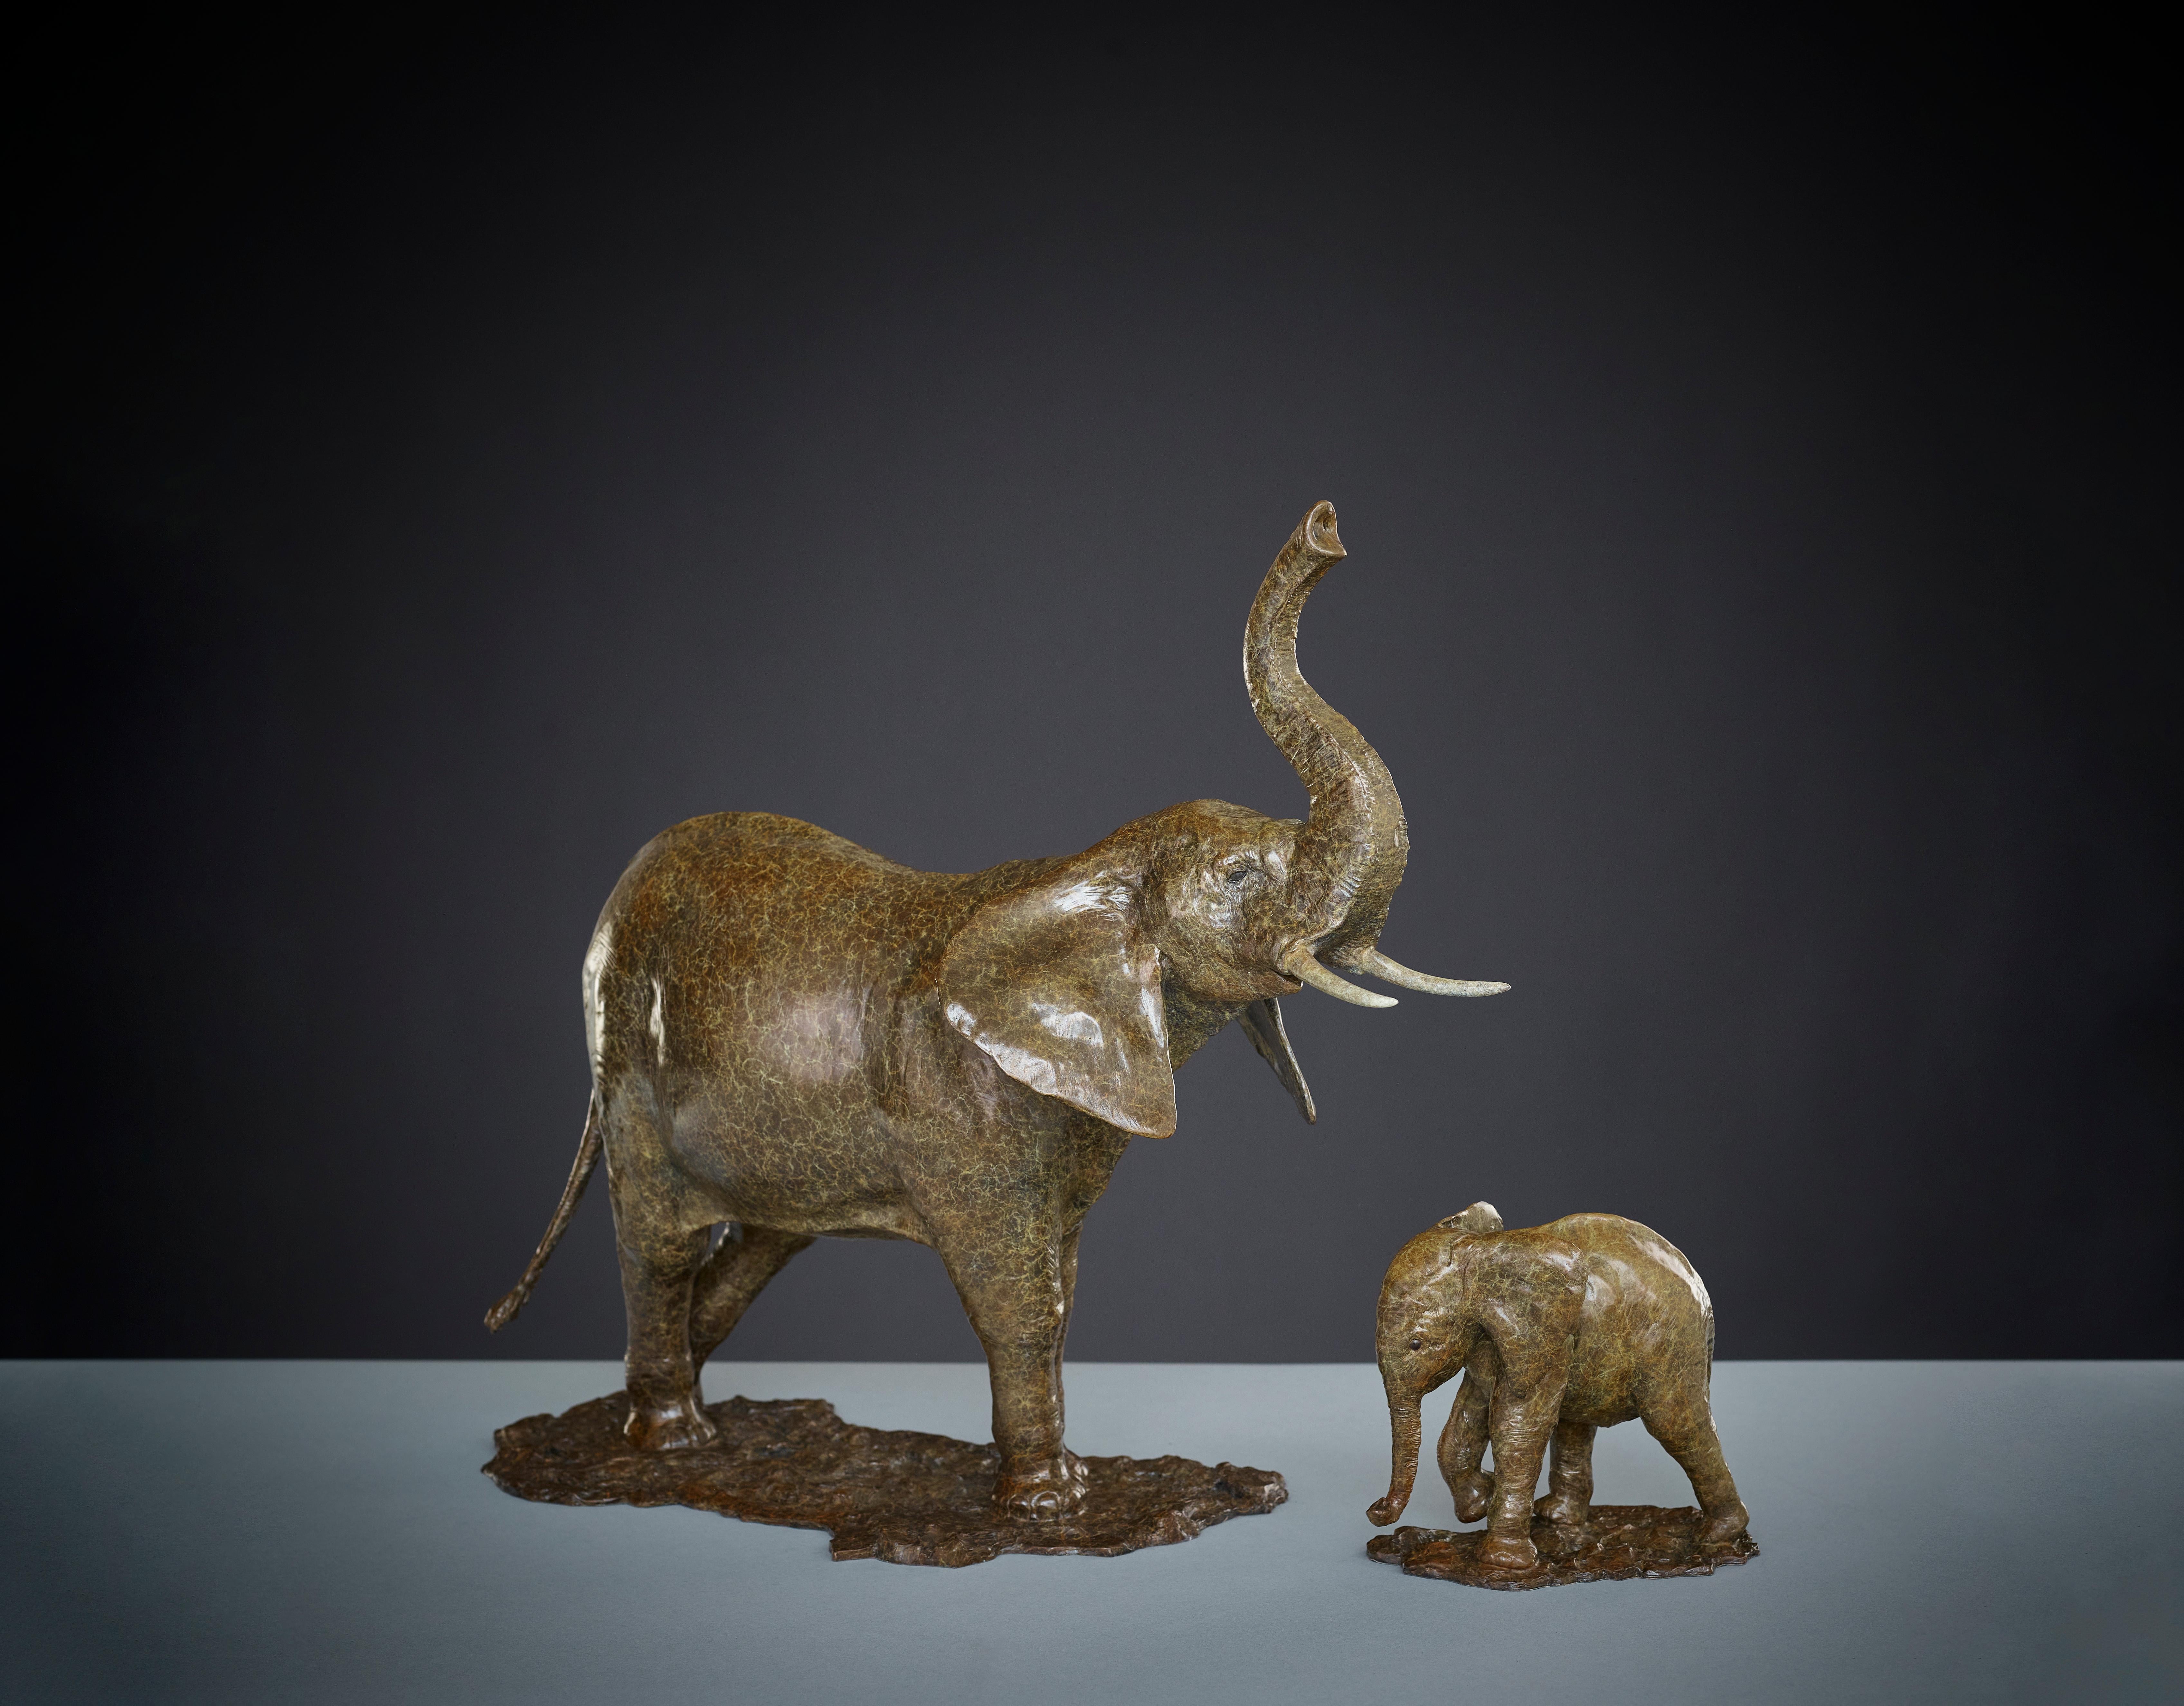 'Elephant' Bronze Wildlife contemporary sculpture of an African Elephant. Brown - Gold Figurative Sculpture by Tobias Martin